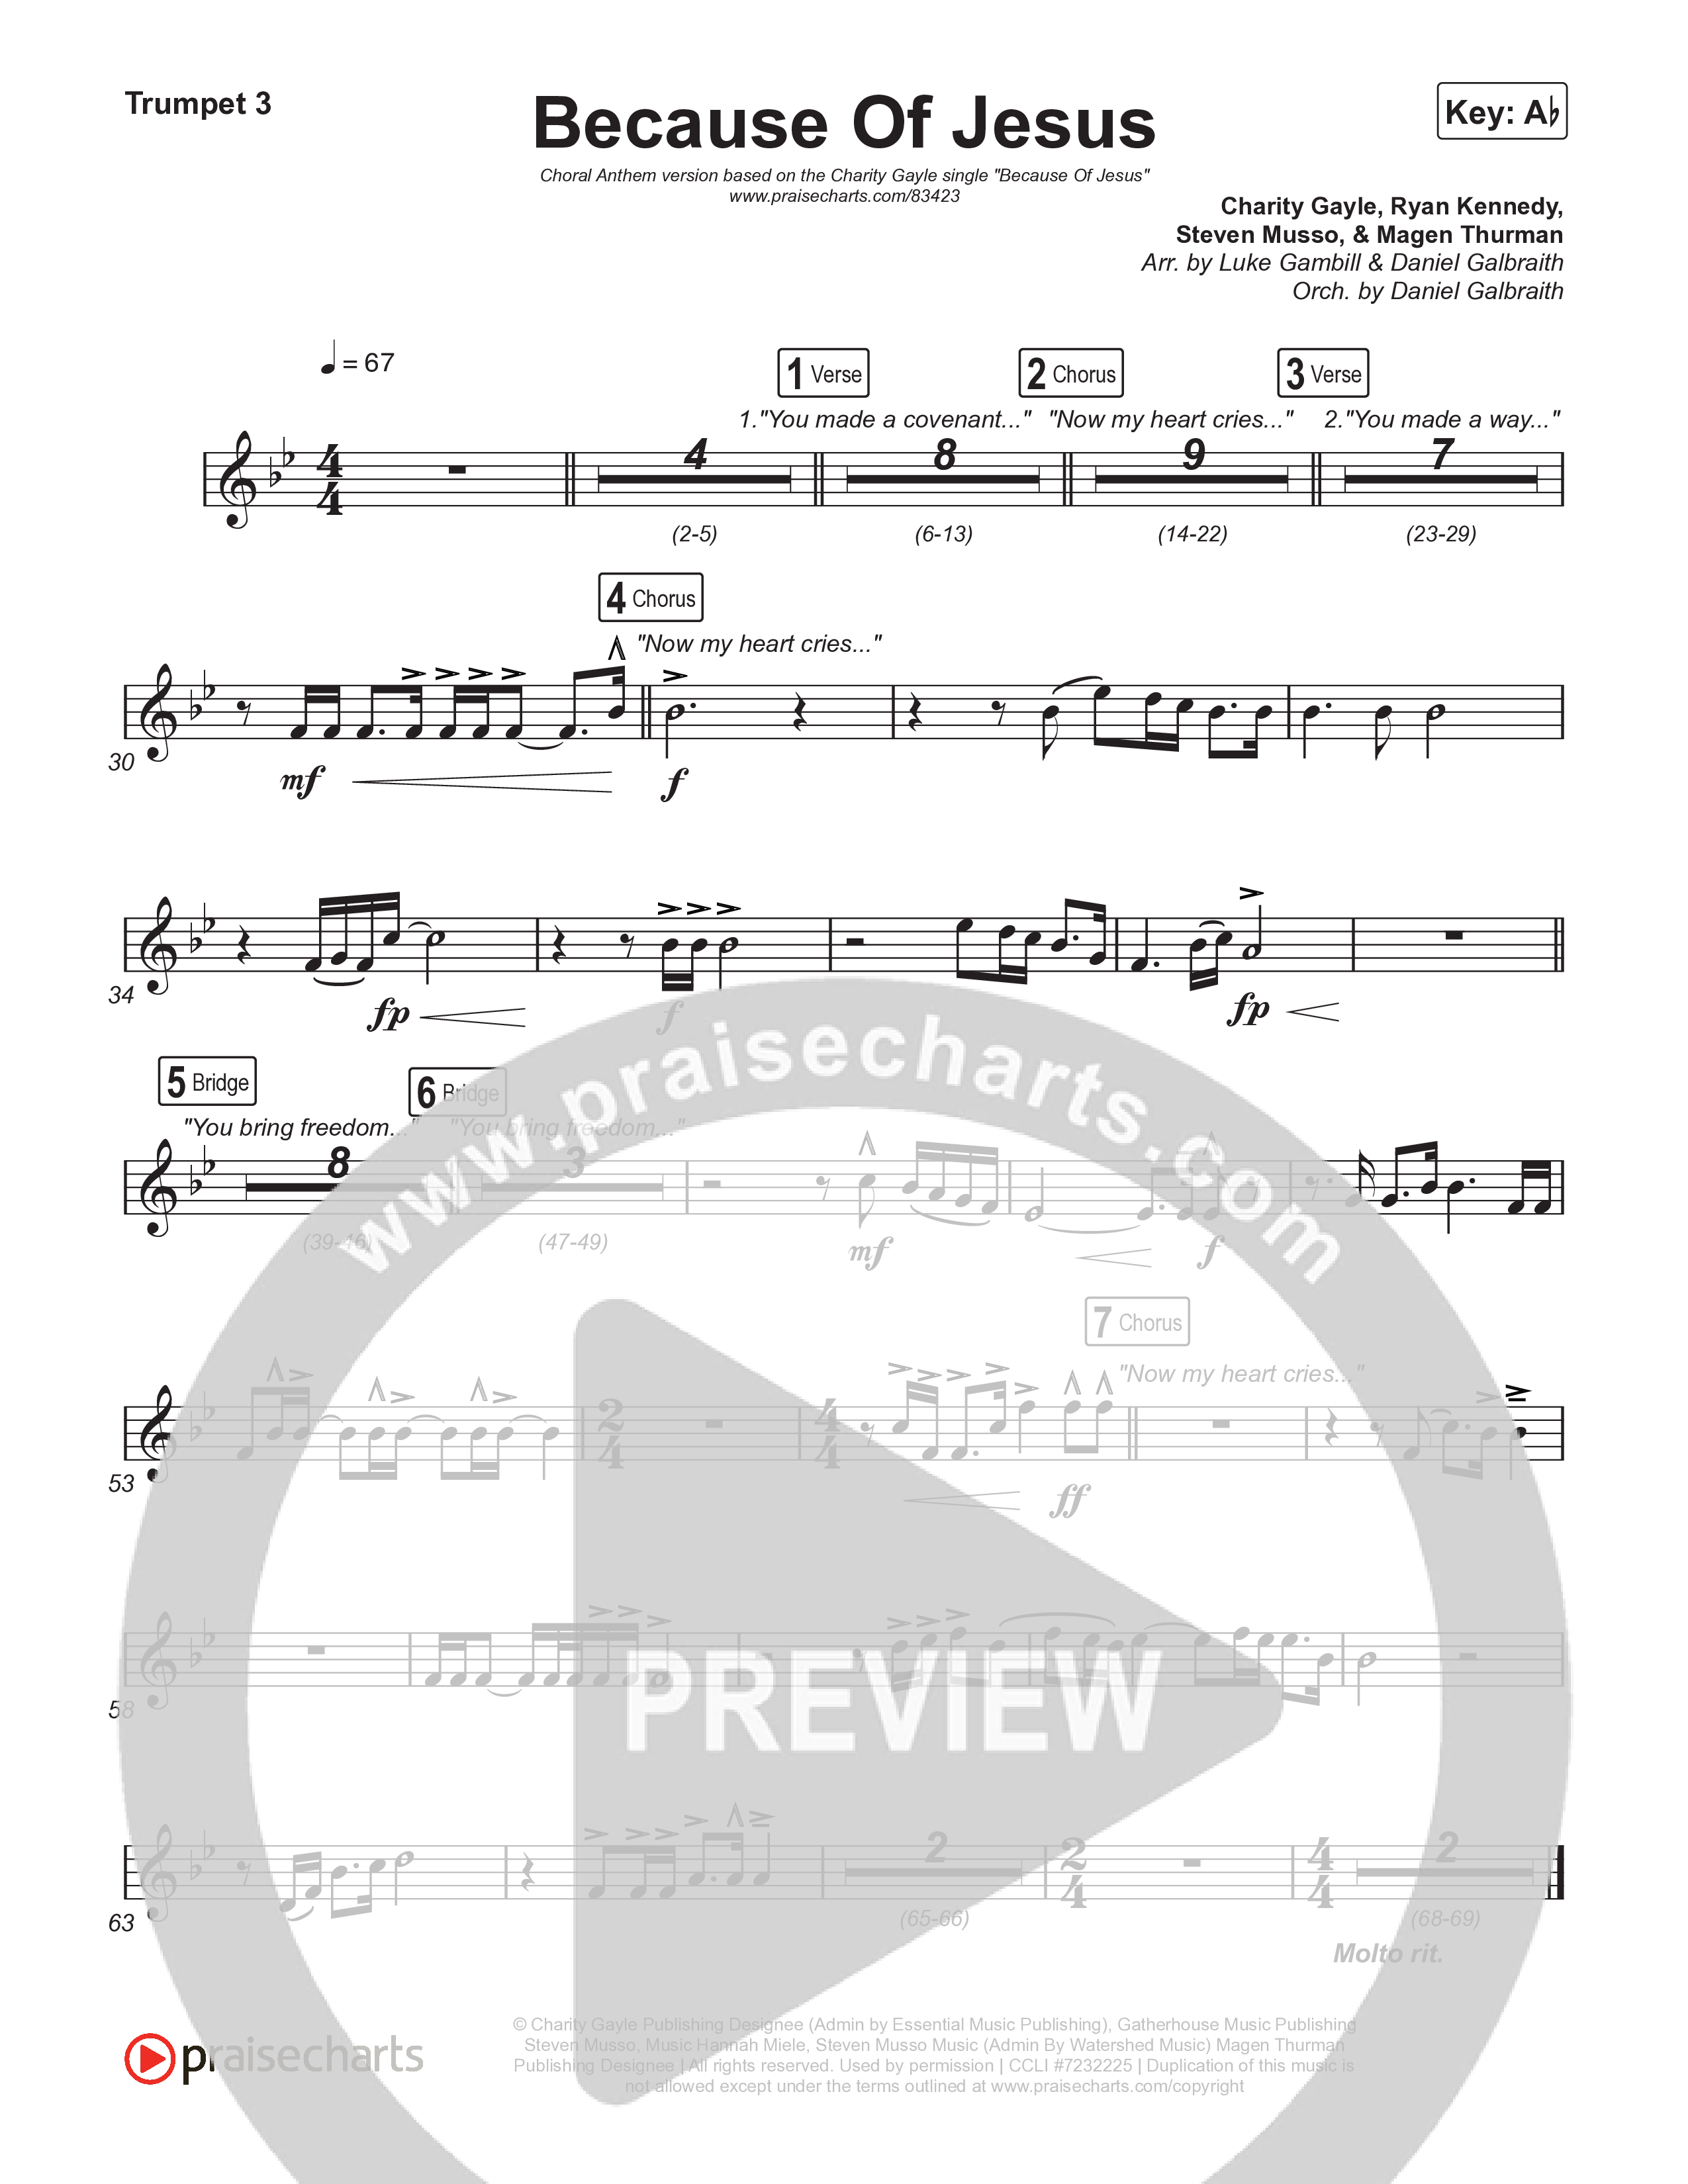 Because Of Jesus (Choral Anthem SATB) Trumpet 1,2 (Charity Gayle / Arr. Luke Gambill)